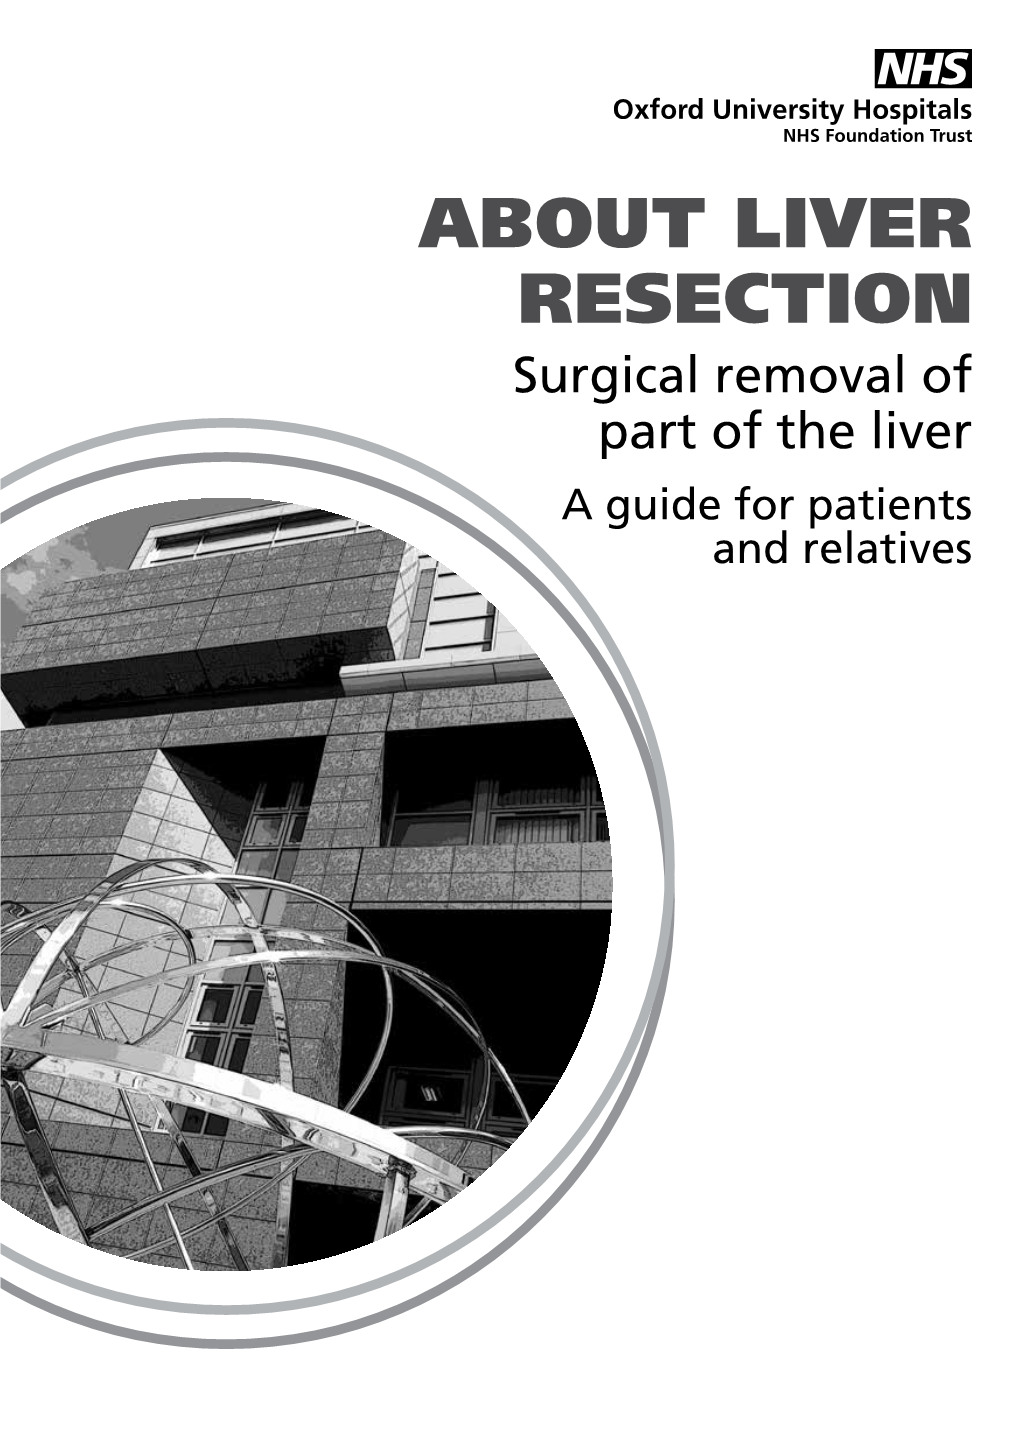 About Liver Resection